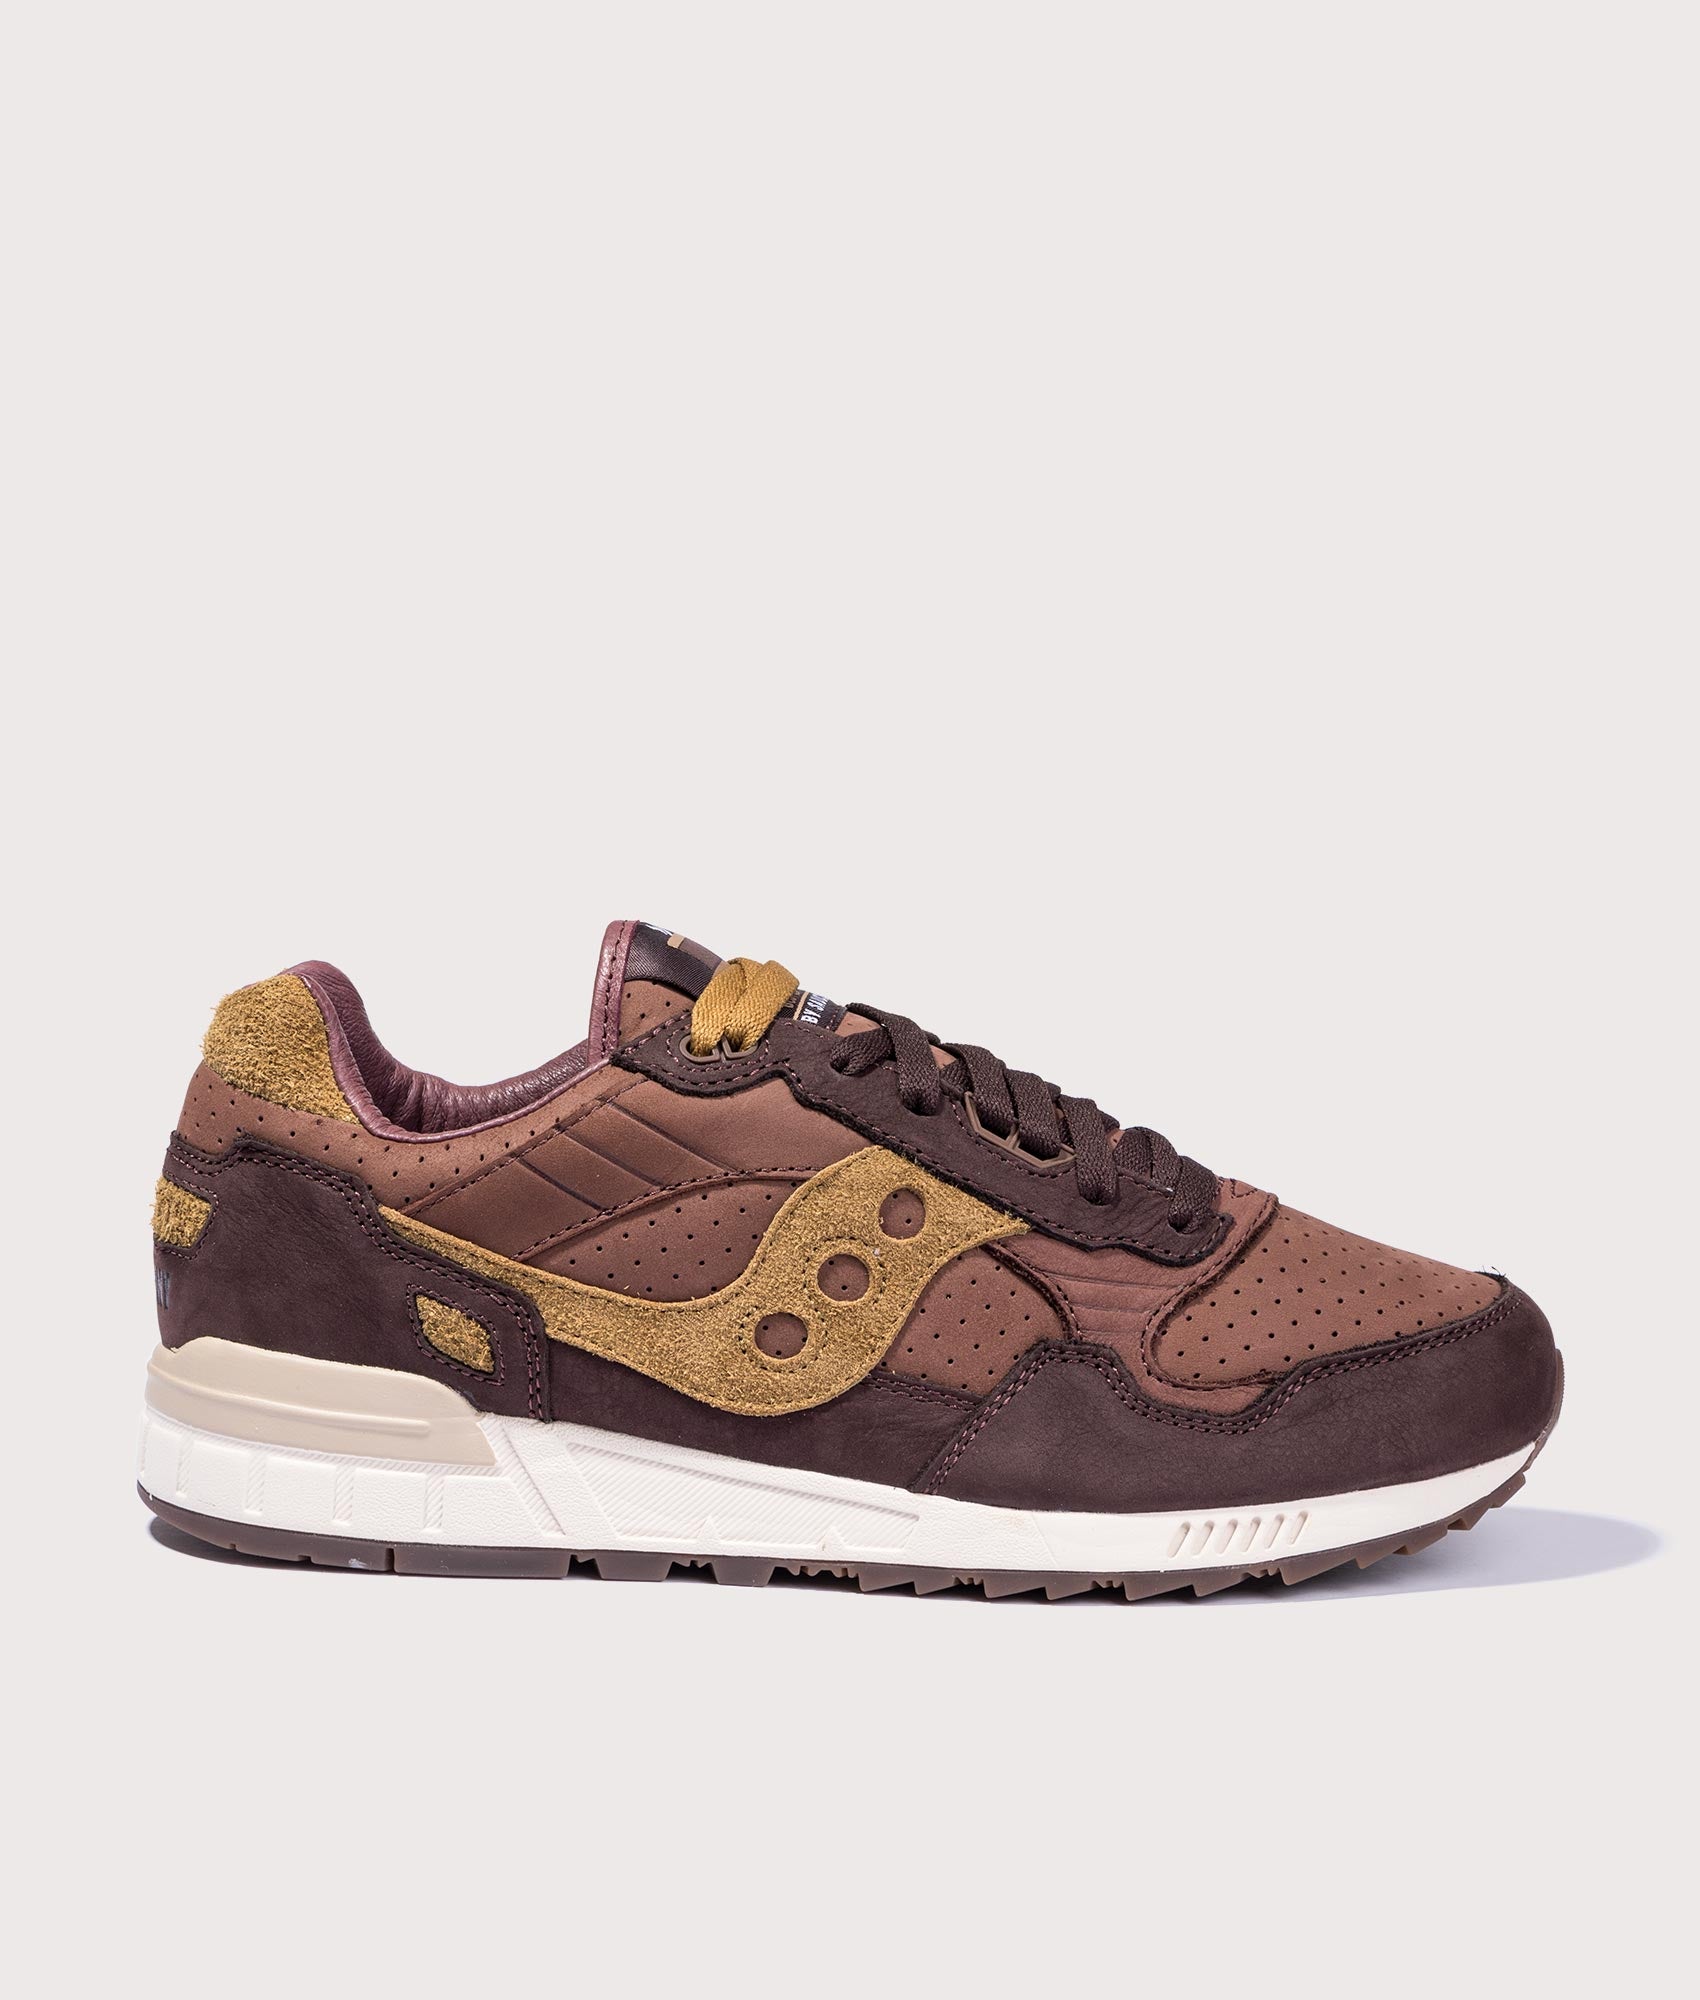 Saucony Mens Shadow 5000 Espresso Sneakers - Colour: 200 Brown - Size: 9